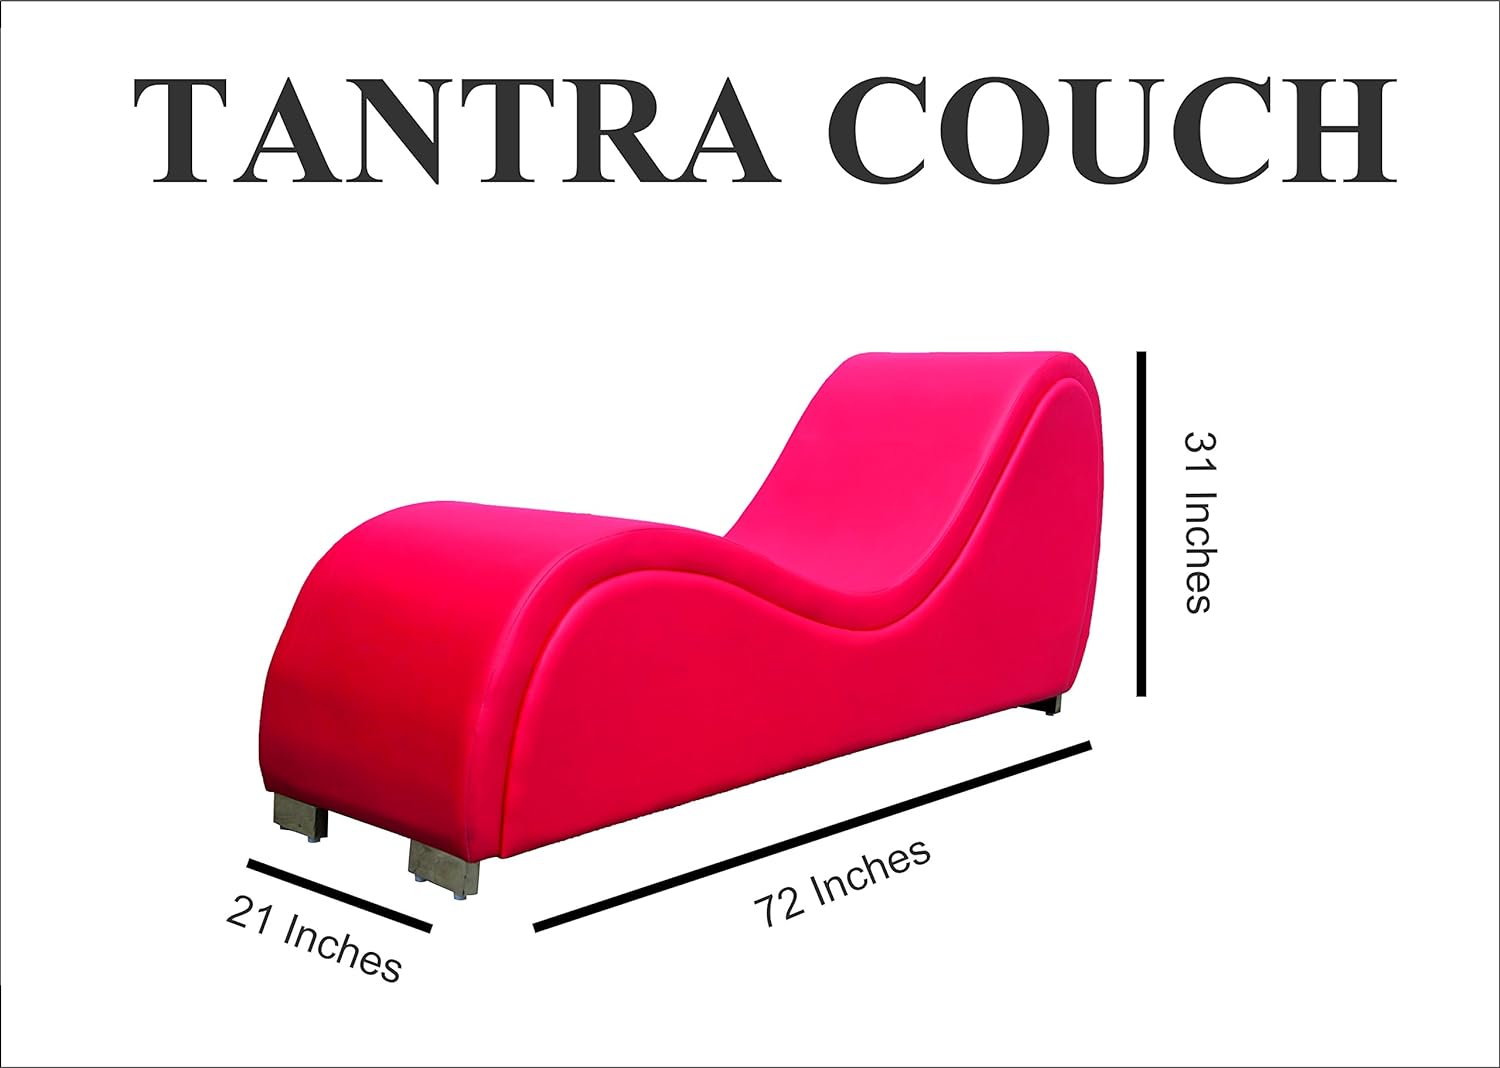 How to make a tantra chair